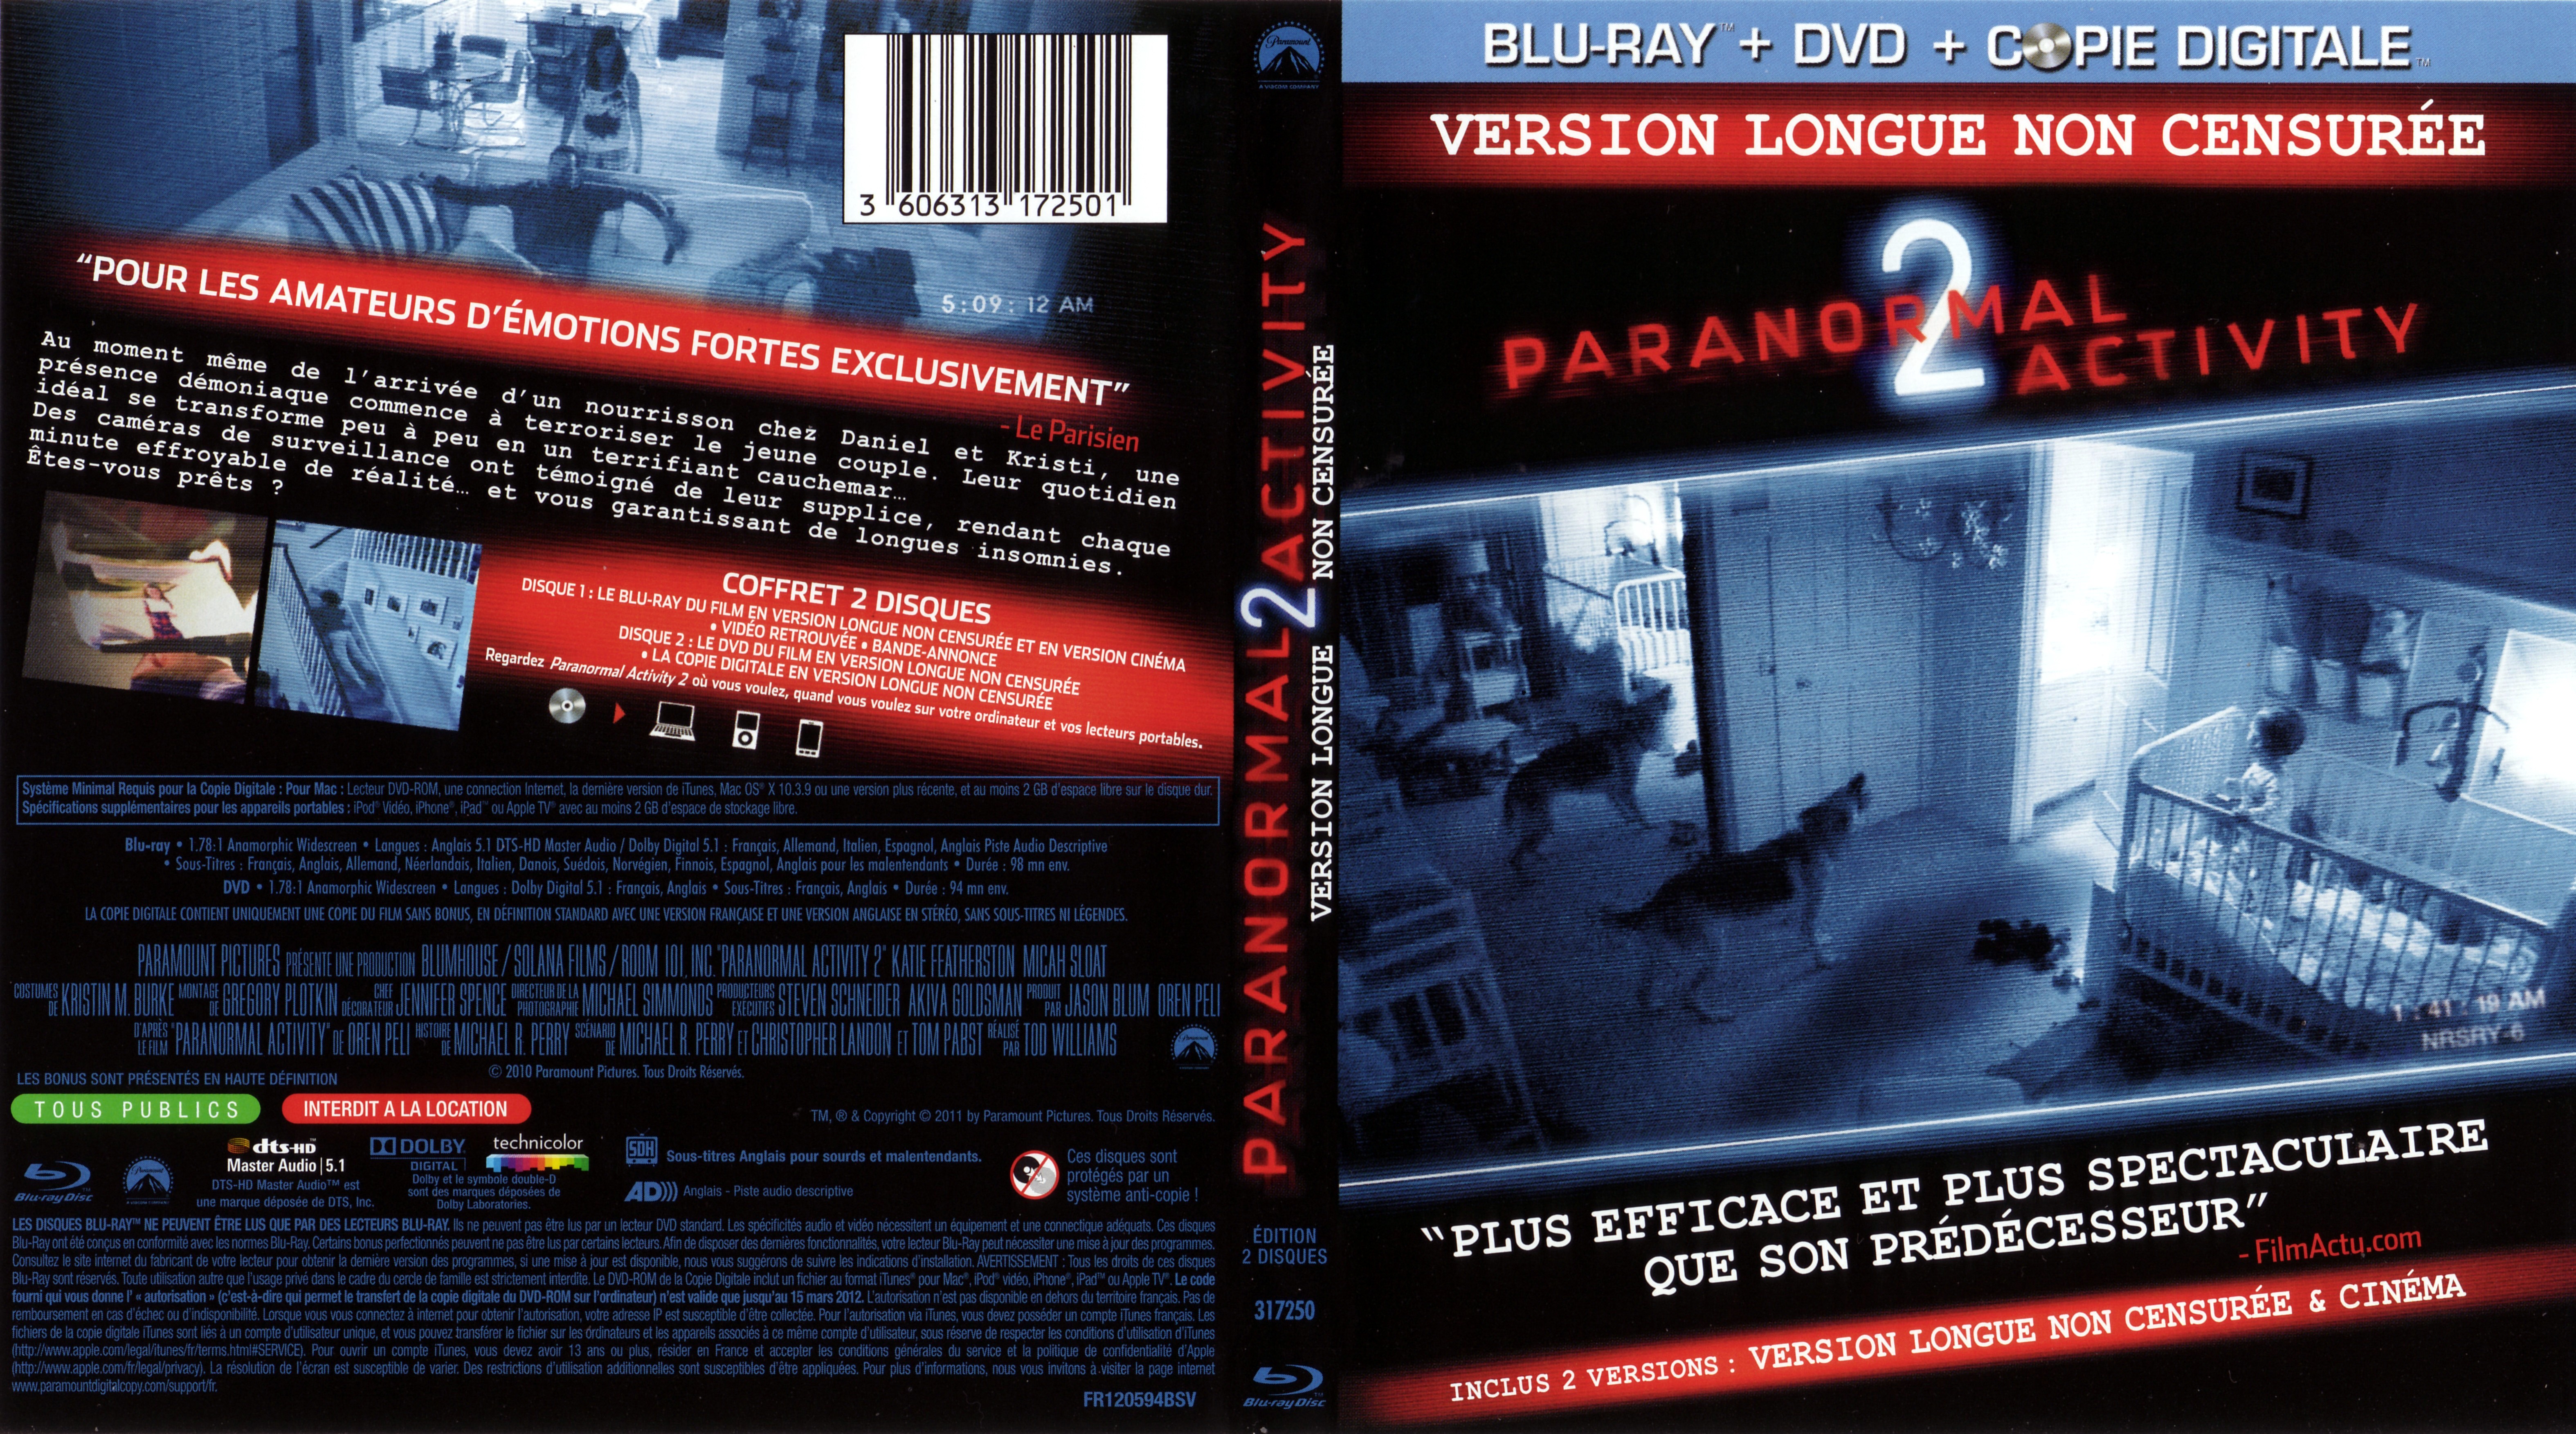 Jaquette DVD Paranormal activity 2 (BLU-RAY)